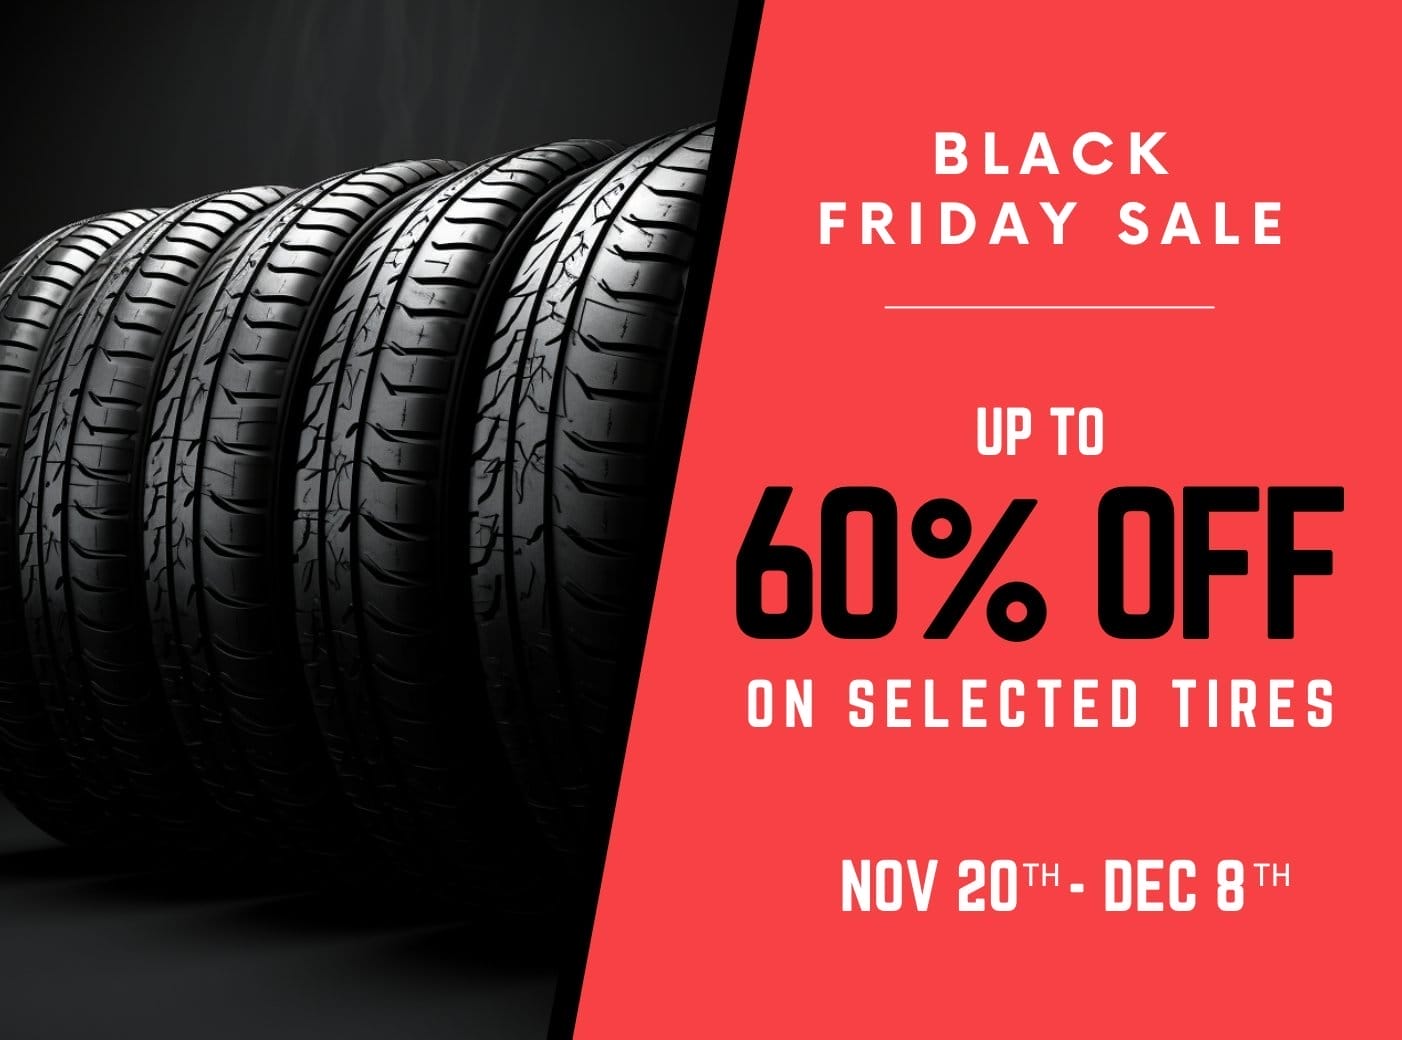 Black Friday: Up to 60% OFF on selected tires